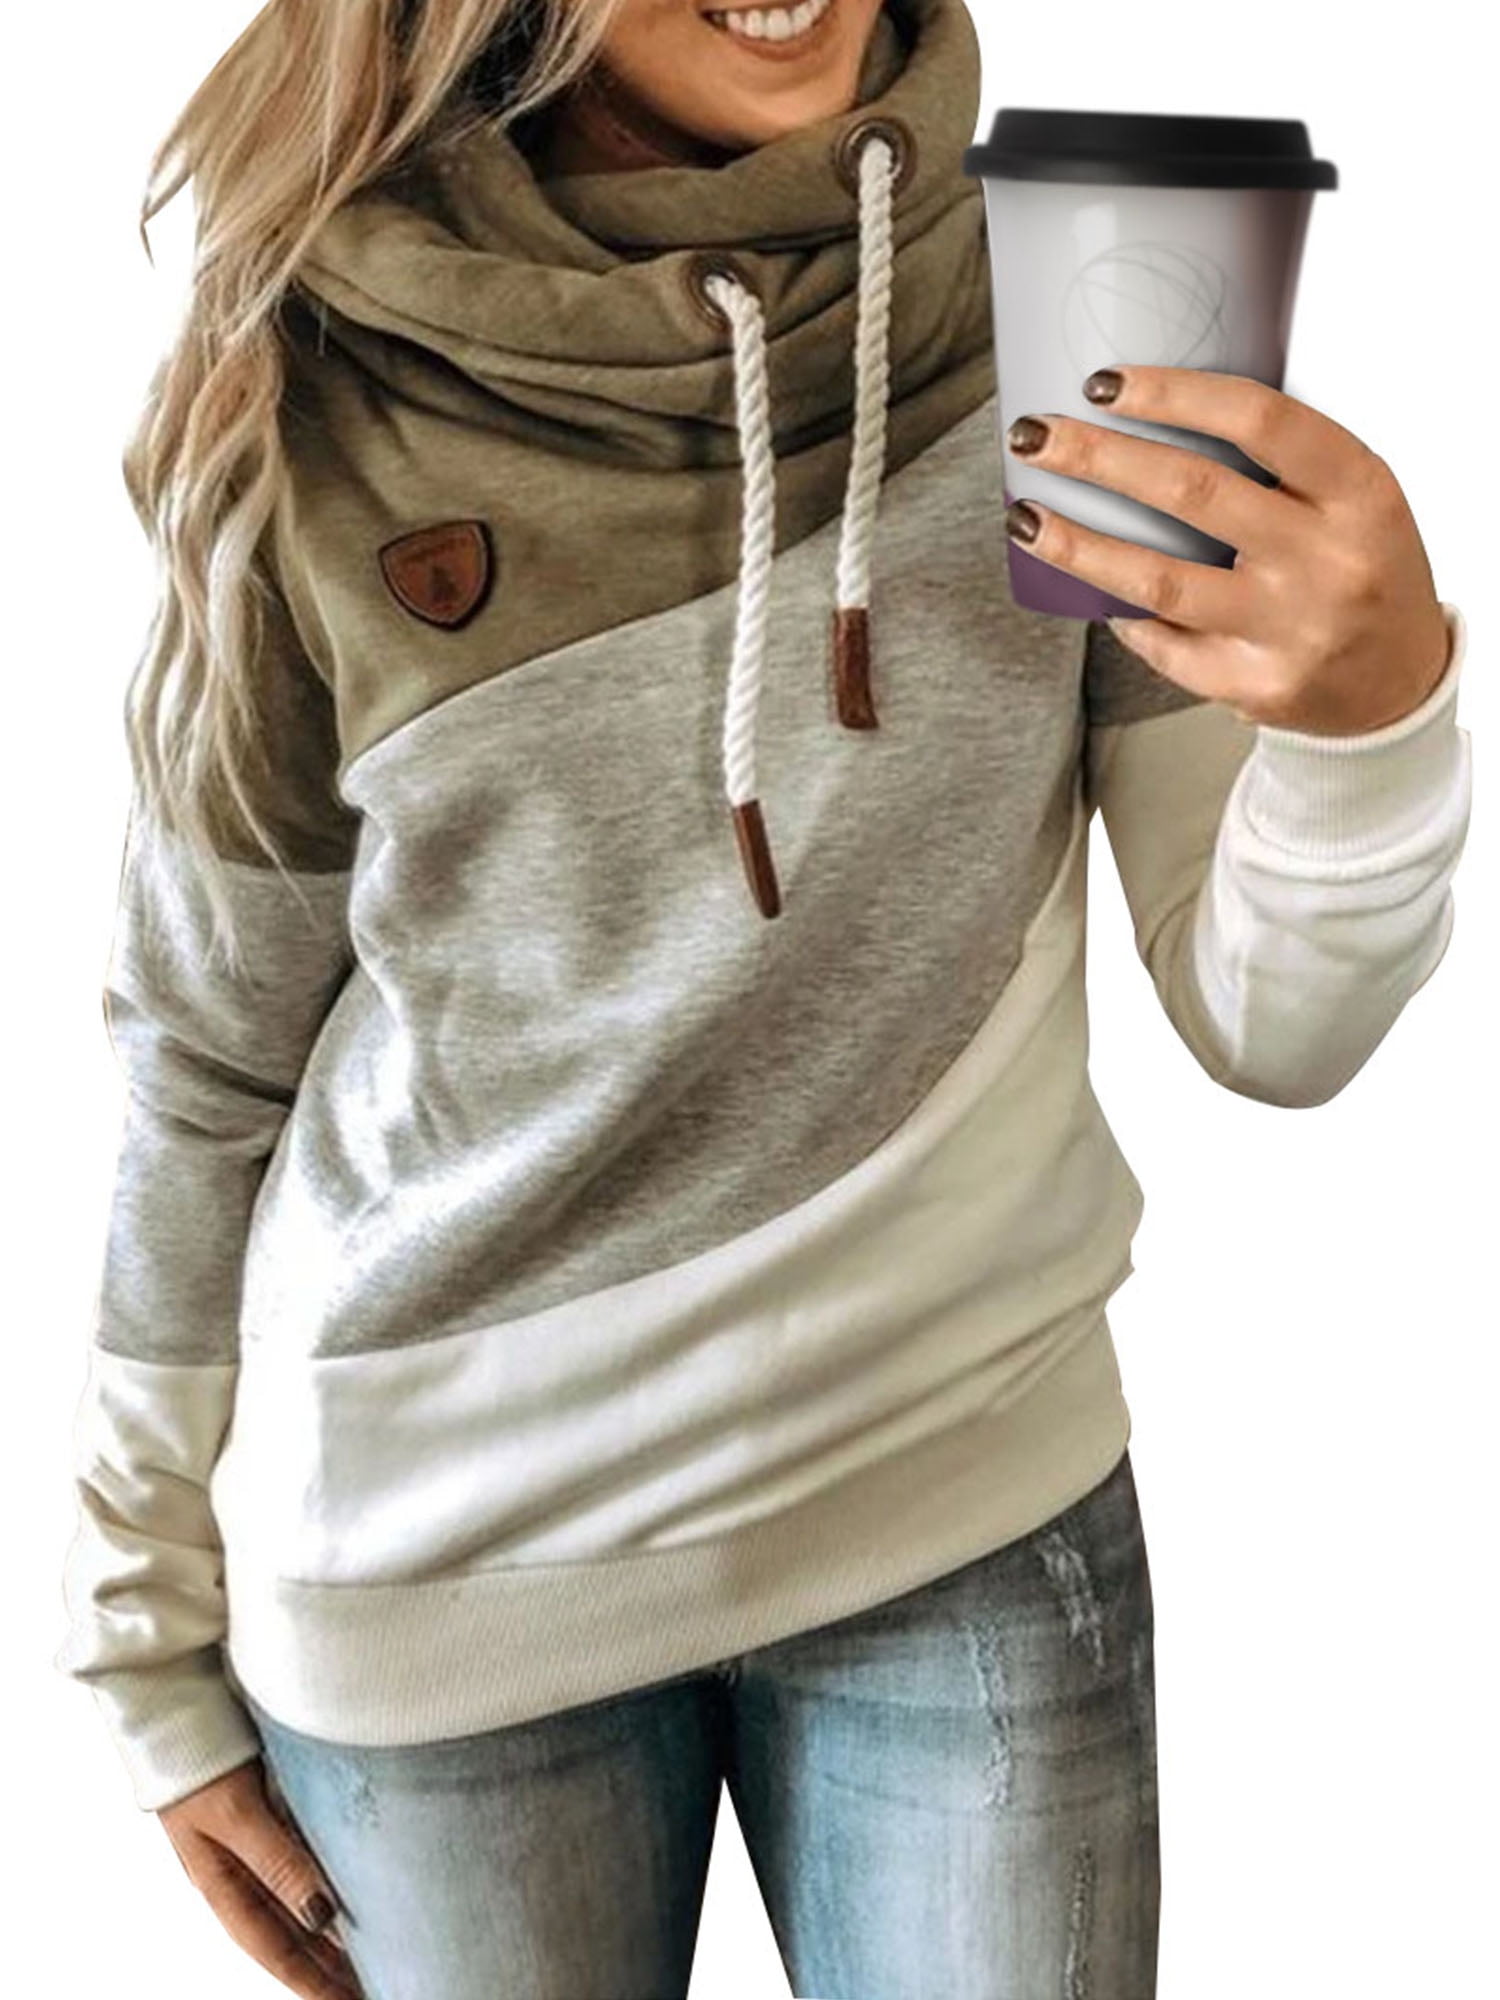 Stars Stripe USA Printing Loose Button Up Neck Pullover Drawstring Hoodies Hooded Sweatshirt Tops for Women 